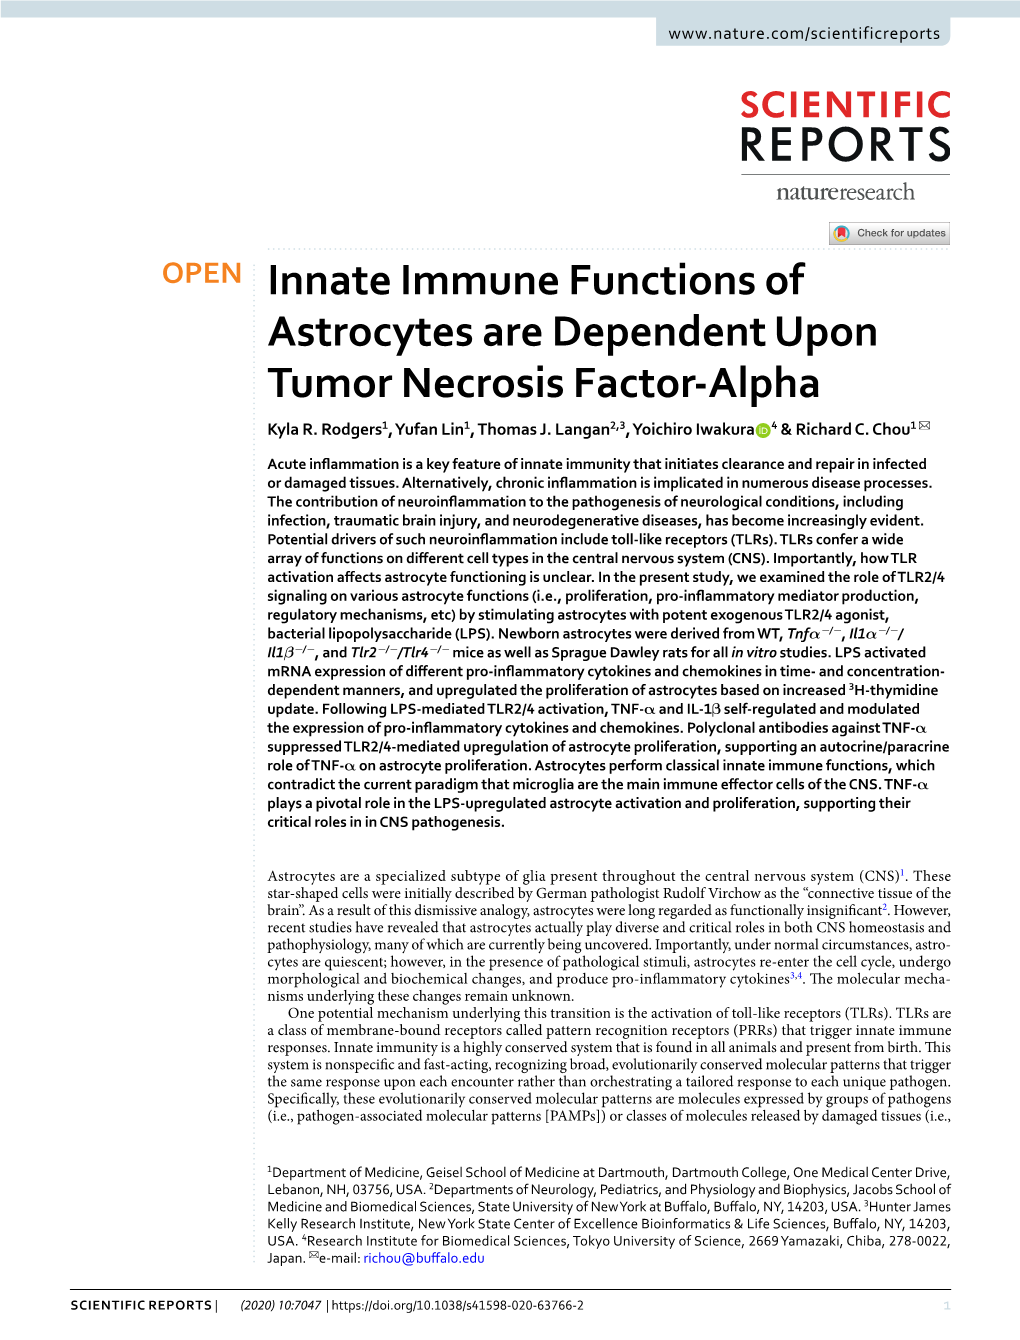 Innate Immune Functions of Astrocytes Are Dependent Upon Tumor Necrosis Factor-Alpha Kyla R